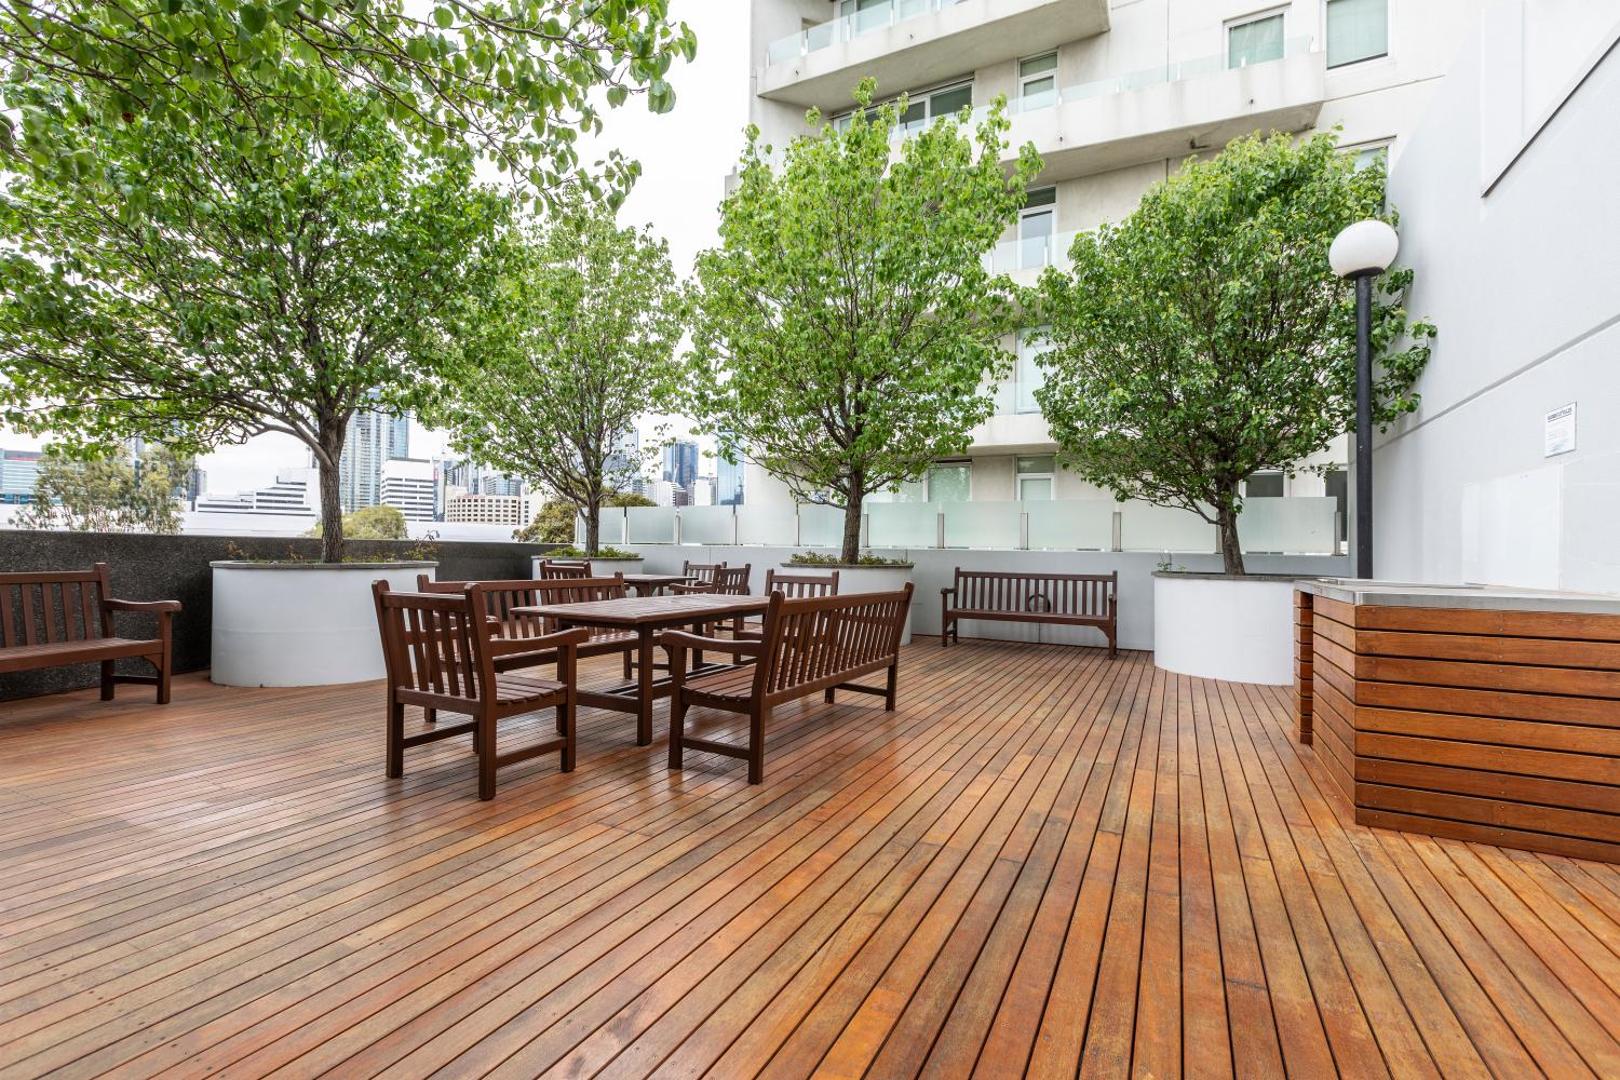 ☆of Southbank☆Light filled apartment☆HUGE private terrace with city views☆Parking☆Pool☆Gym☆WiFi